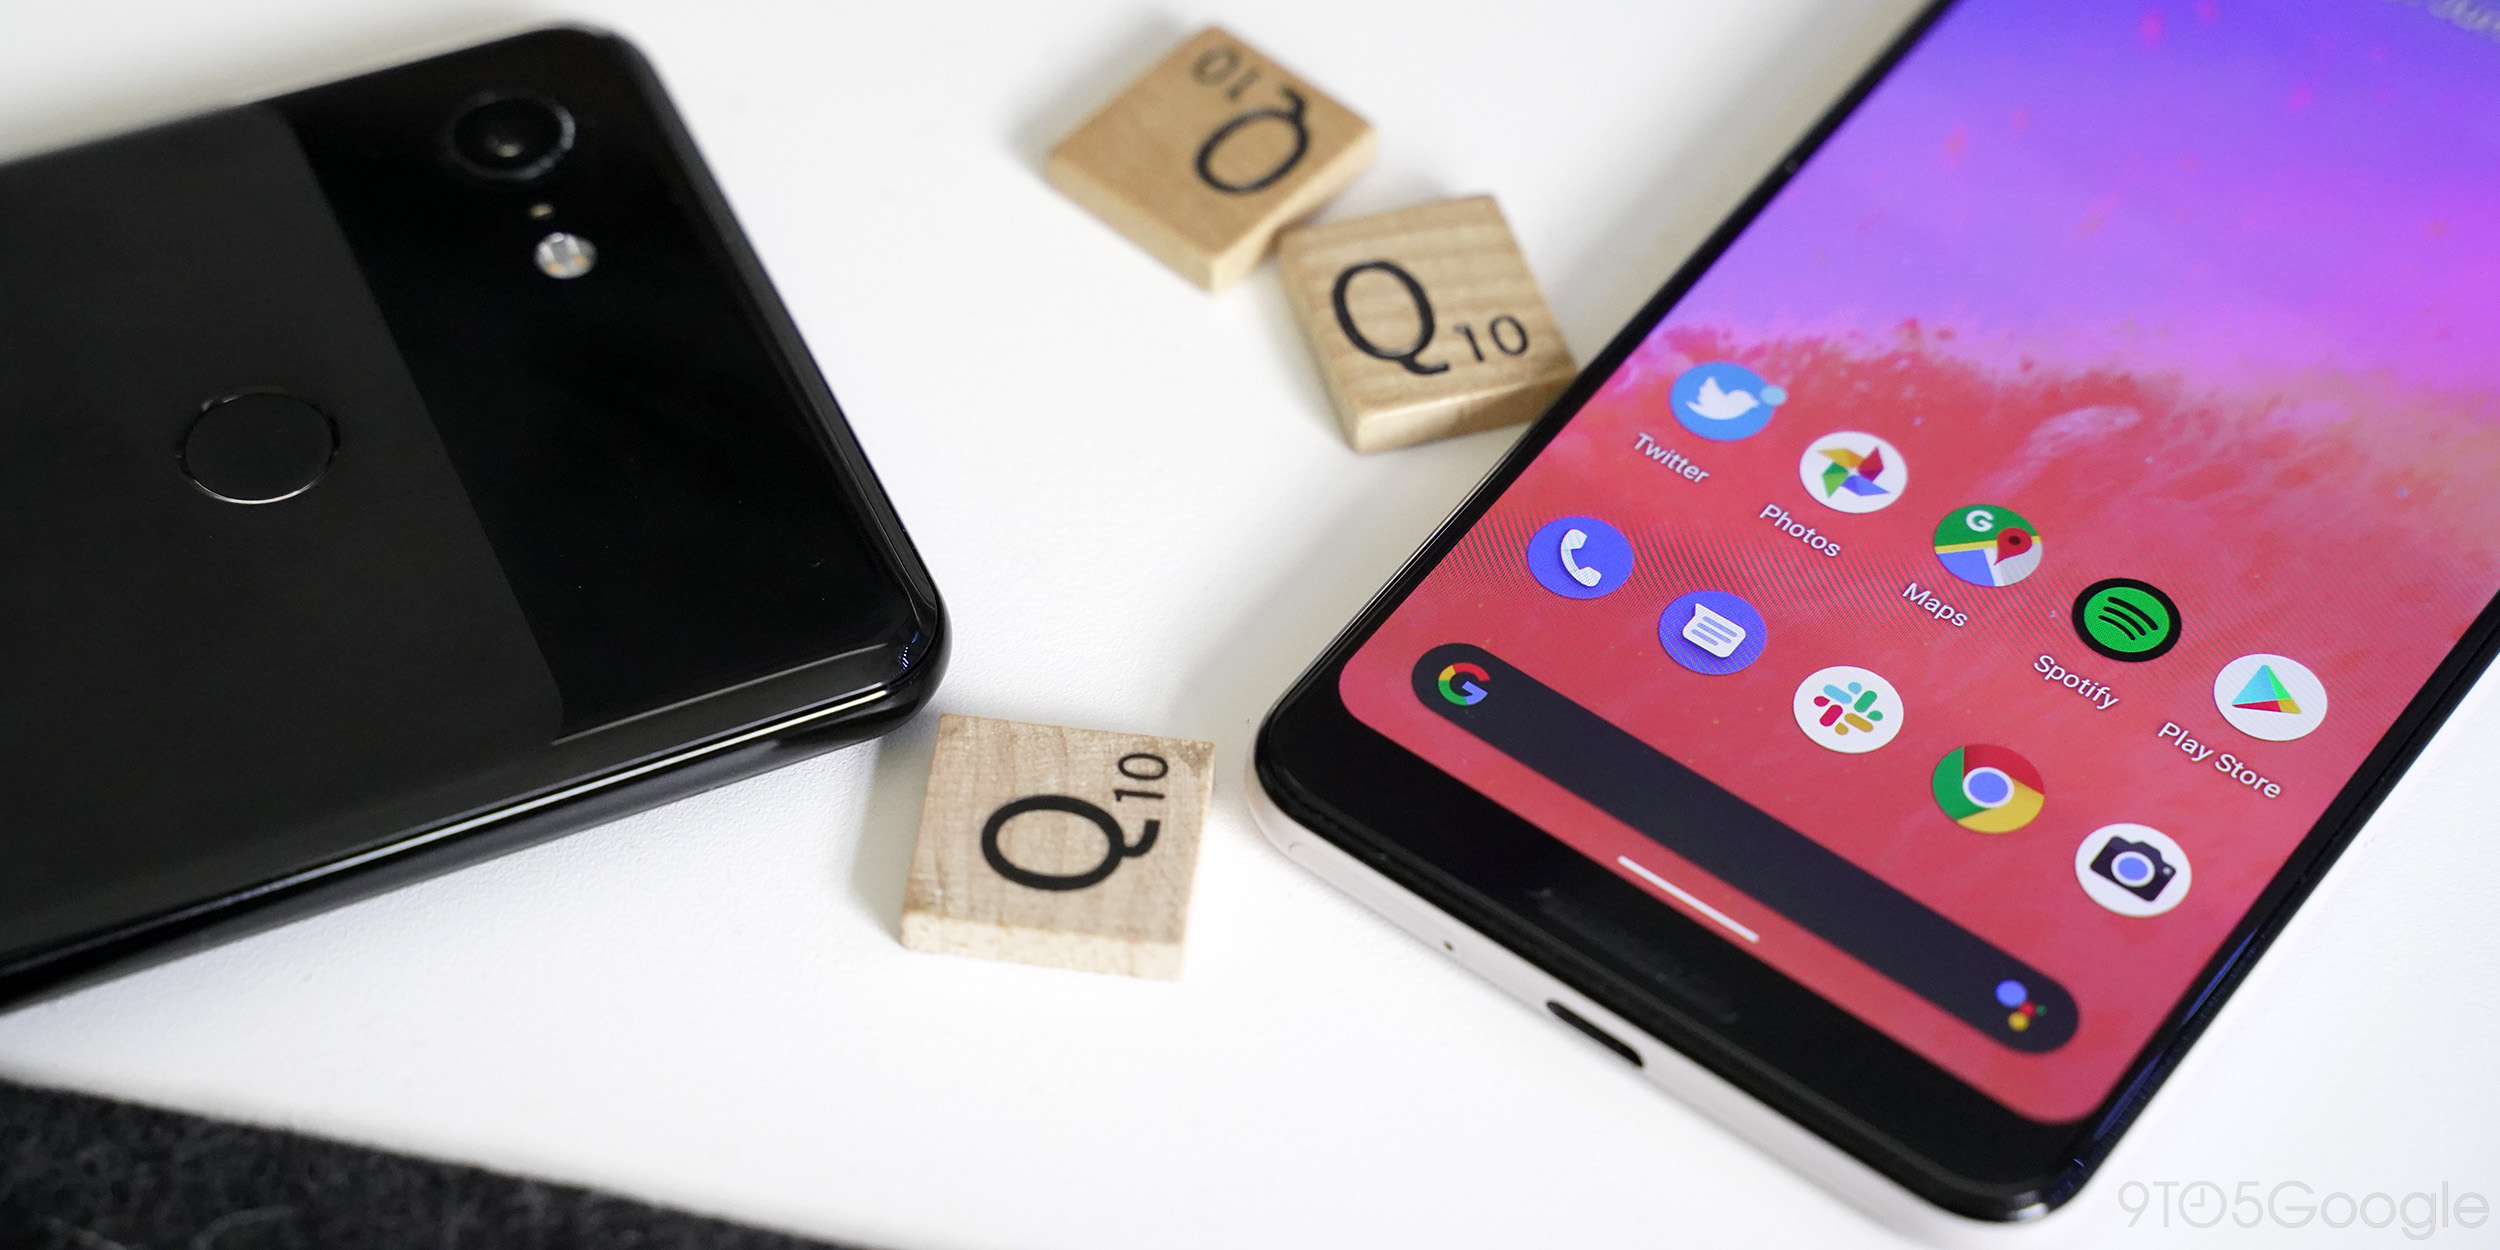 Android Q Beta 4 changes system transition animation - 9to5Google